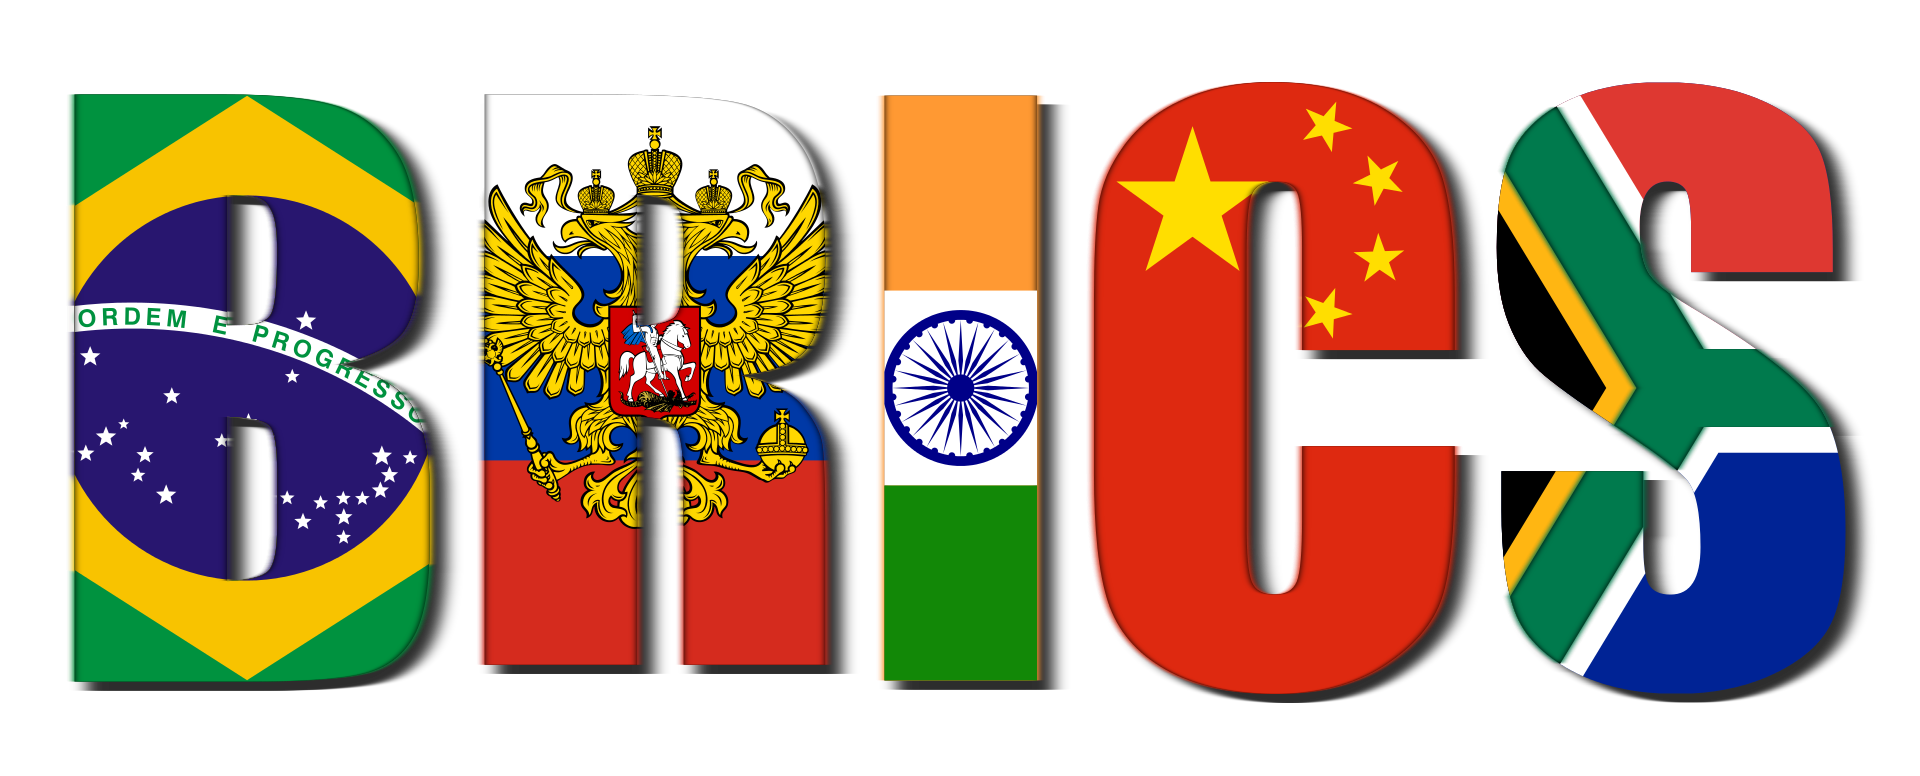 The Rise Of BRICS: The Economic Giant That Is Taking On The West – OpEd By Ramzy Baroud